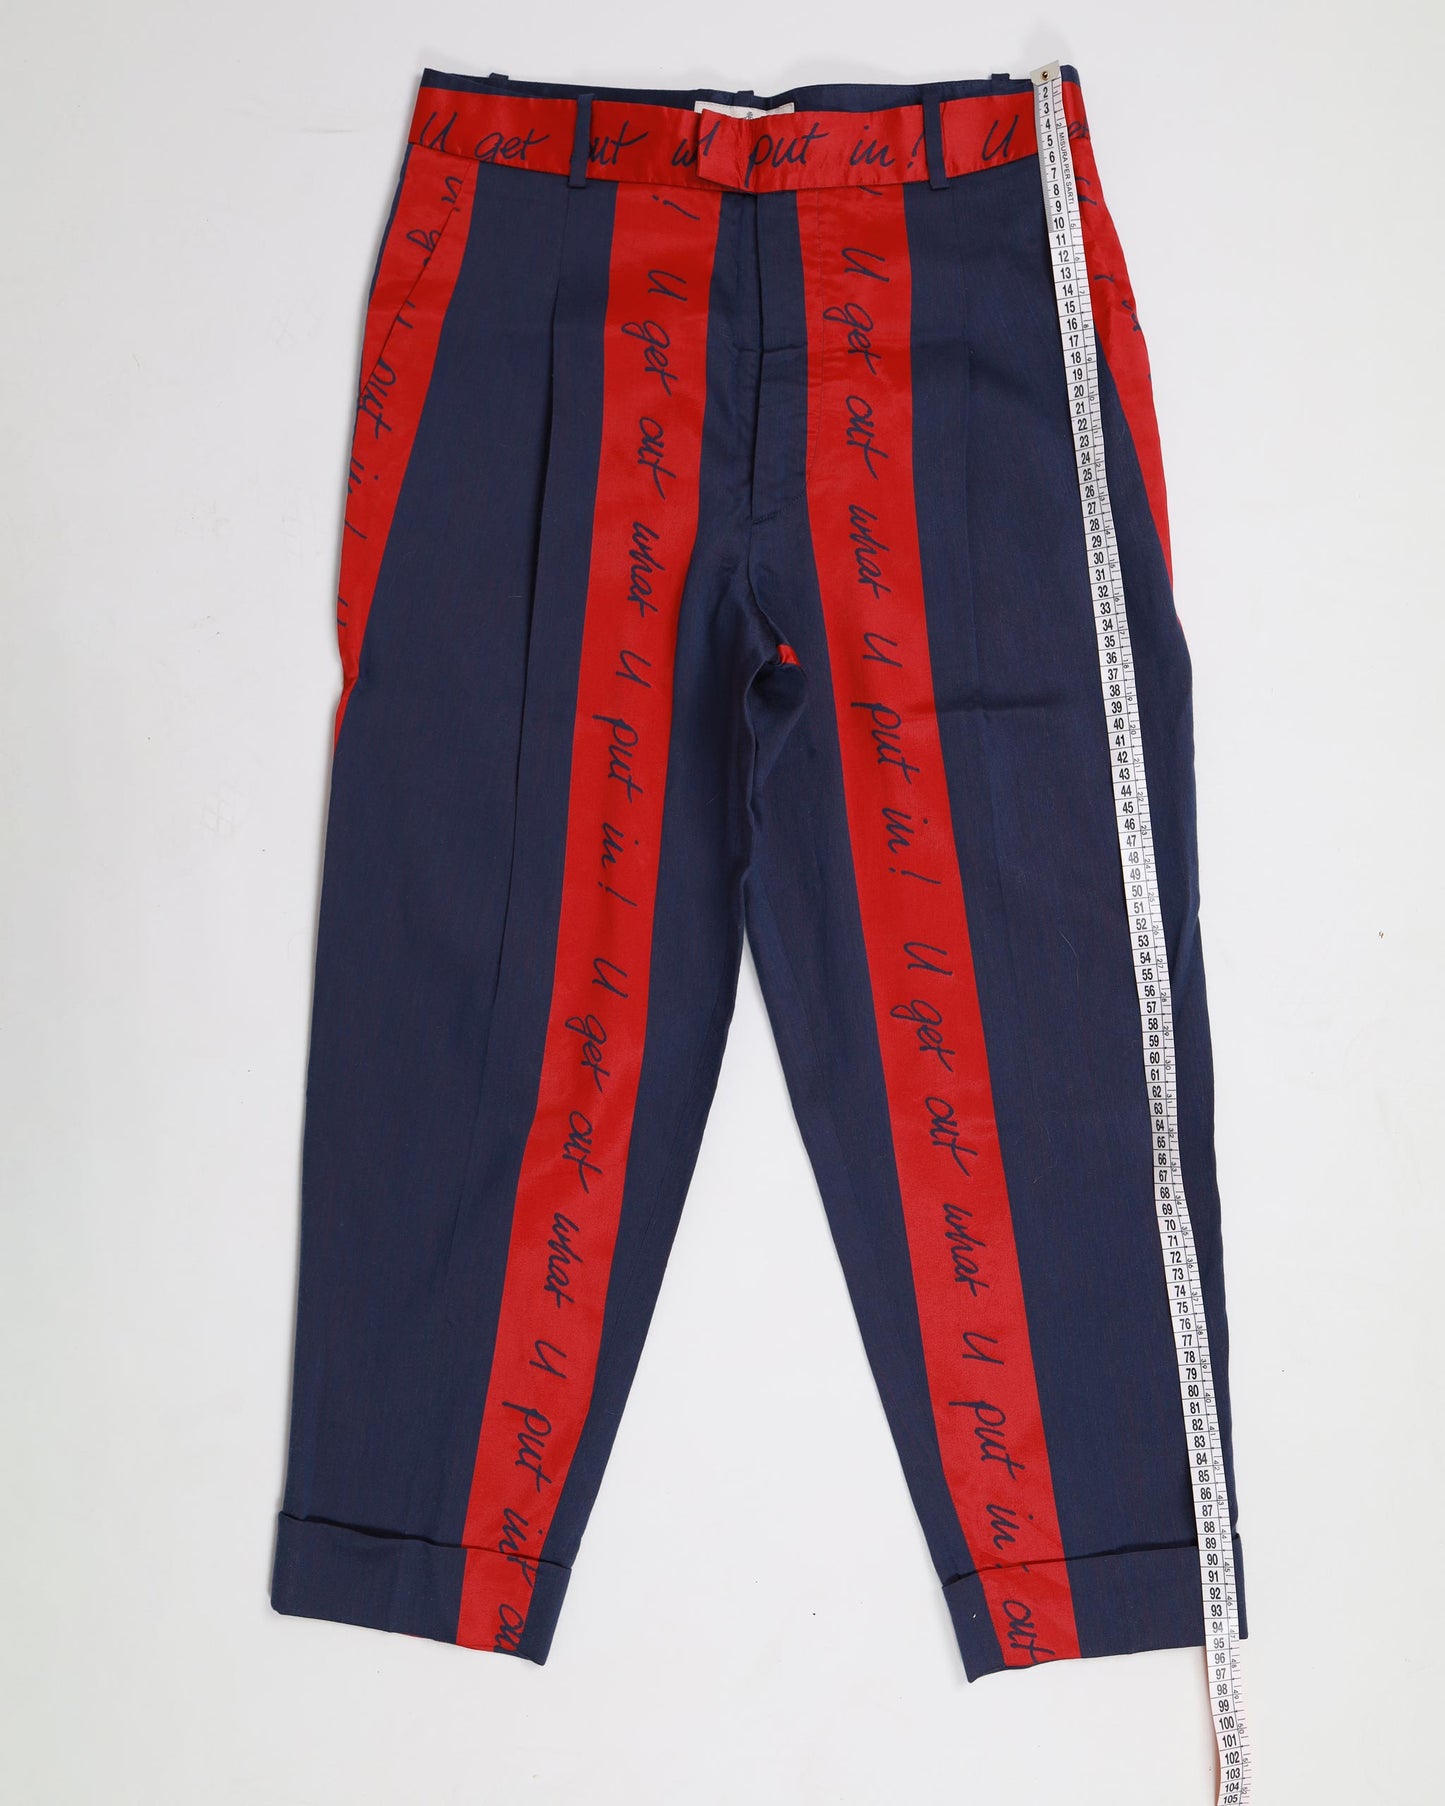 Vivienne Westwood Tapered Fit Slogan Dave Trousers Navy/Red 42